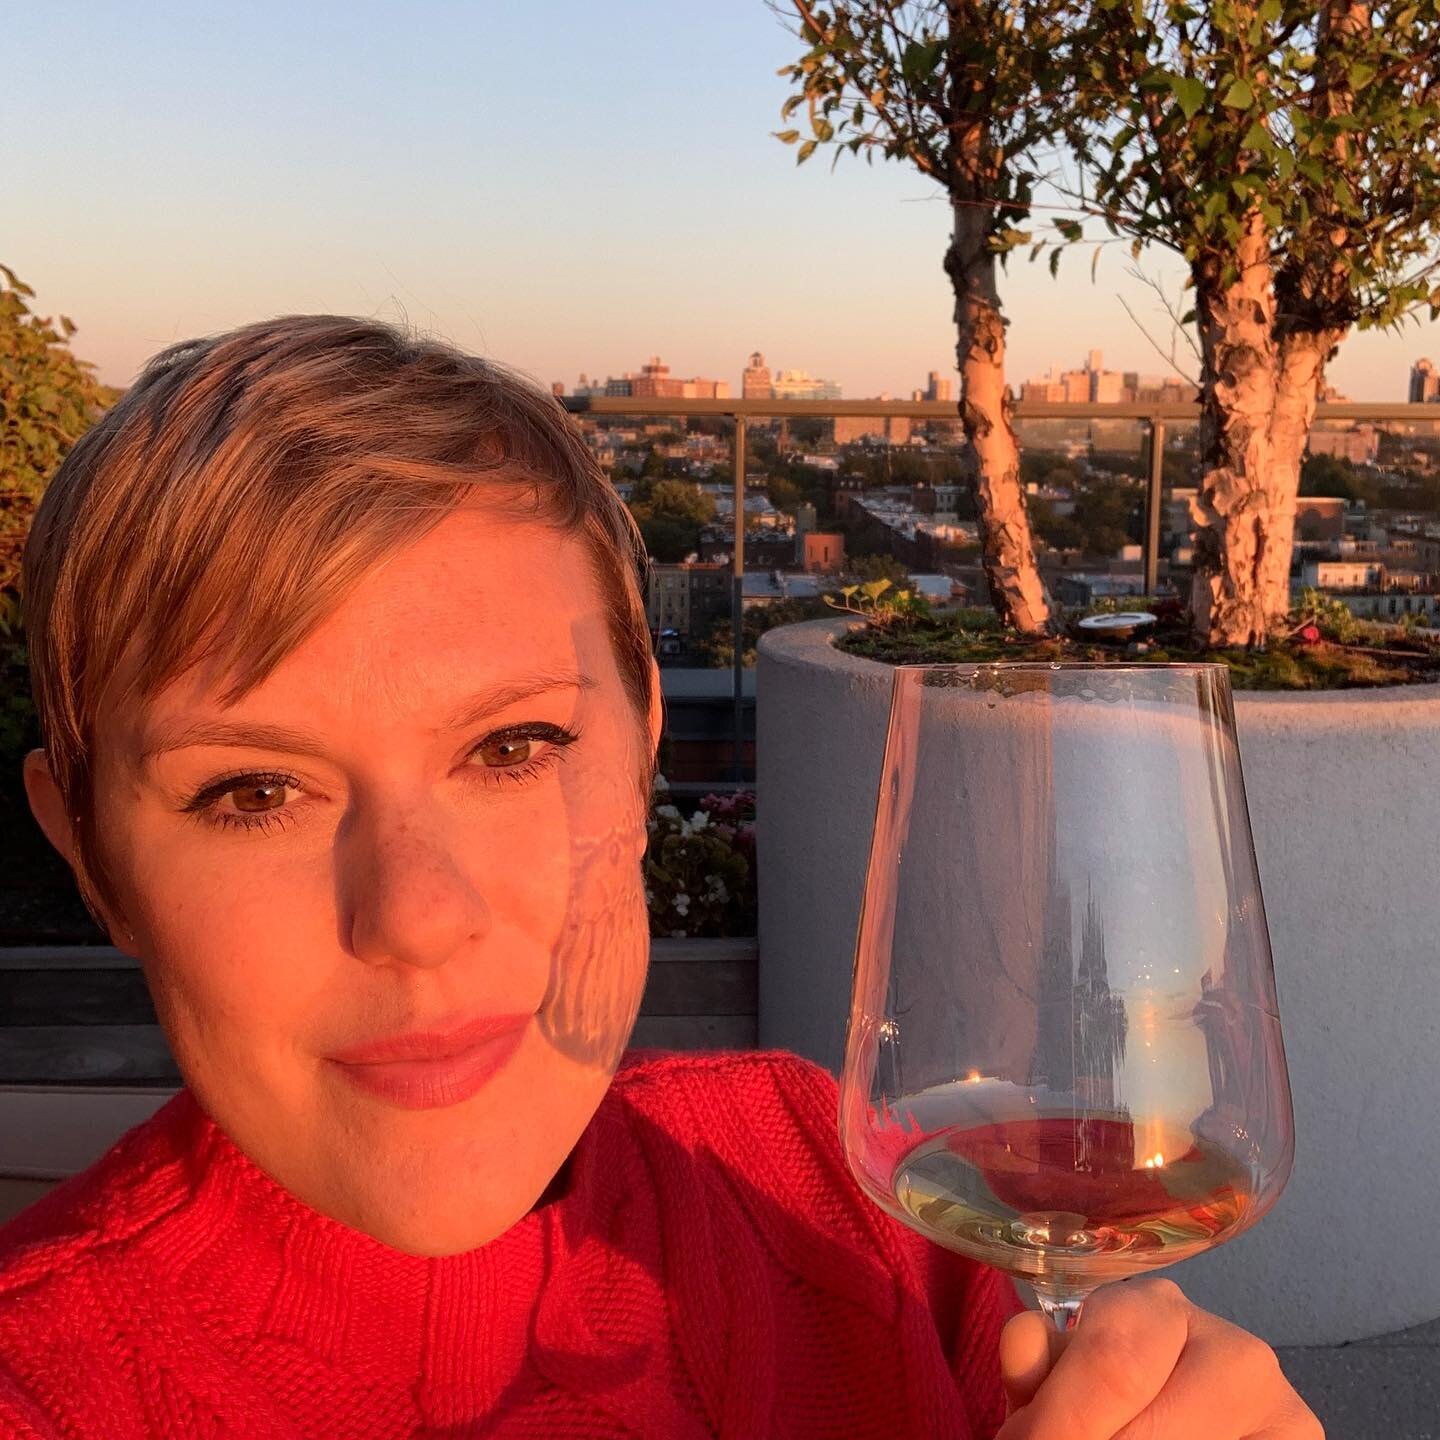 Wishing our (better) half of Ignoble Grapes the happiest of birthdays this year. Cheers to @sarahkatherine22, may this year bring many adventures in wine!
⁣
Celebrations continue to be a little unconventional, but you better believe we&rsquo;ve still